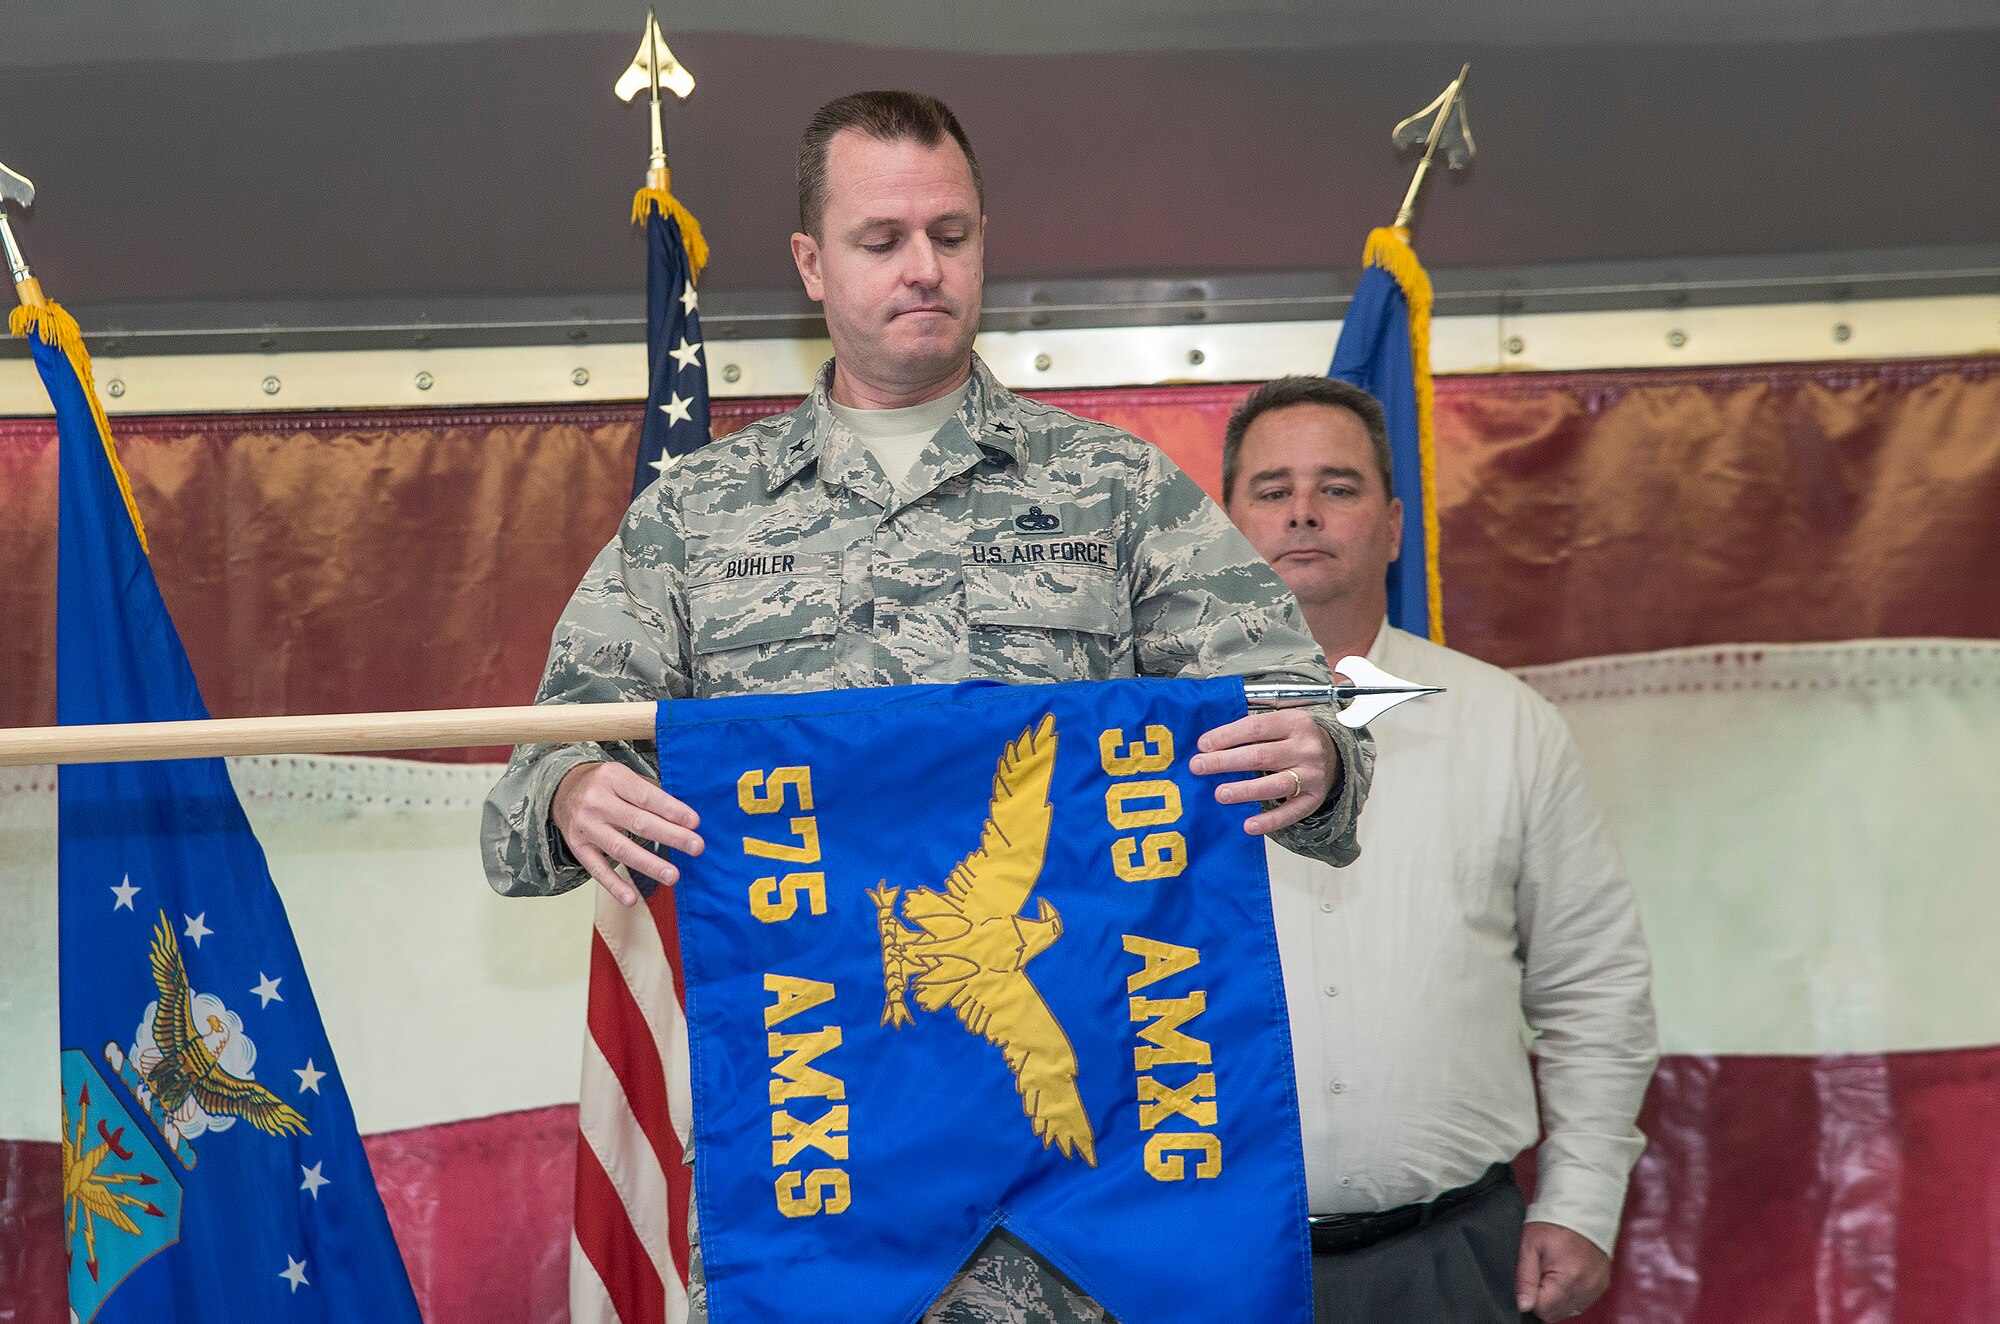 Brig. Gen. Carl Buhler, Ogden Air Logistics Complex commander, unfurls the 575th Aircraft Maintenance Squadron guidon as part of the 575th AMXS activation ceremony Dec. 11 at Joint Base San Antonio-Randolph. The 575th AMXS is a geographically separate unit assigned to the 309th Aircraft Maintenance Group, Ogden Air Logistics Complex Hill Air Force Base, Utah. The squadron is responsible for depot level maintenance, restoration and modification of over 500 T-38 Talon aircraft for the United States Air Force and Navy. (U.S. Air Force photo by Johnny Saldivar)